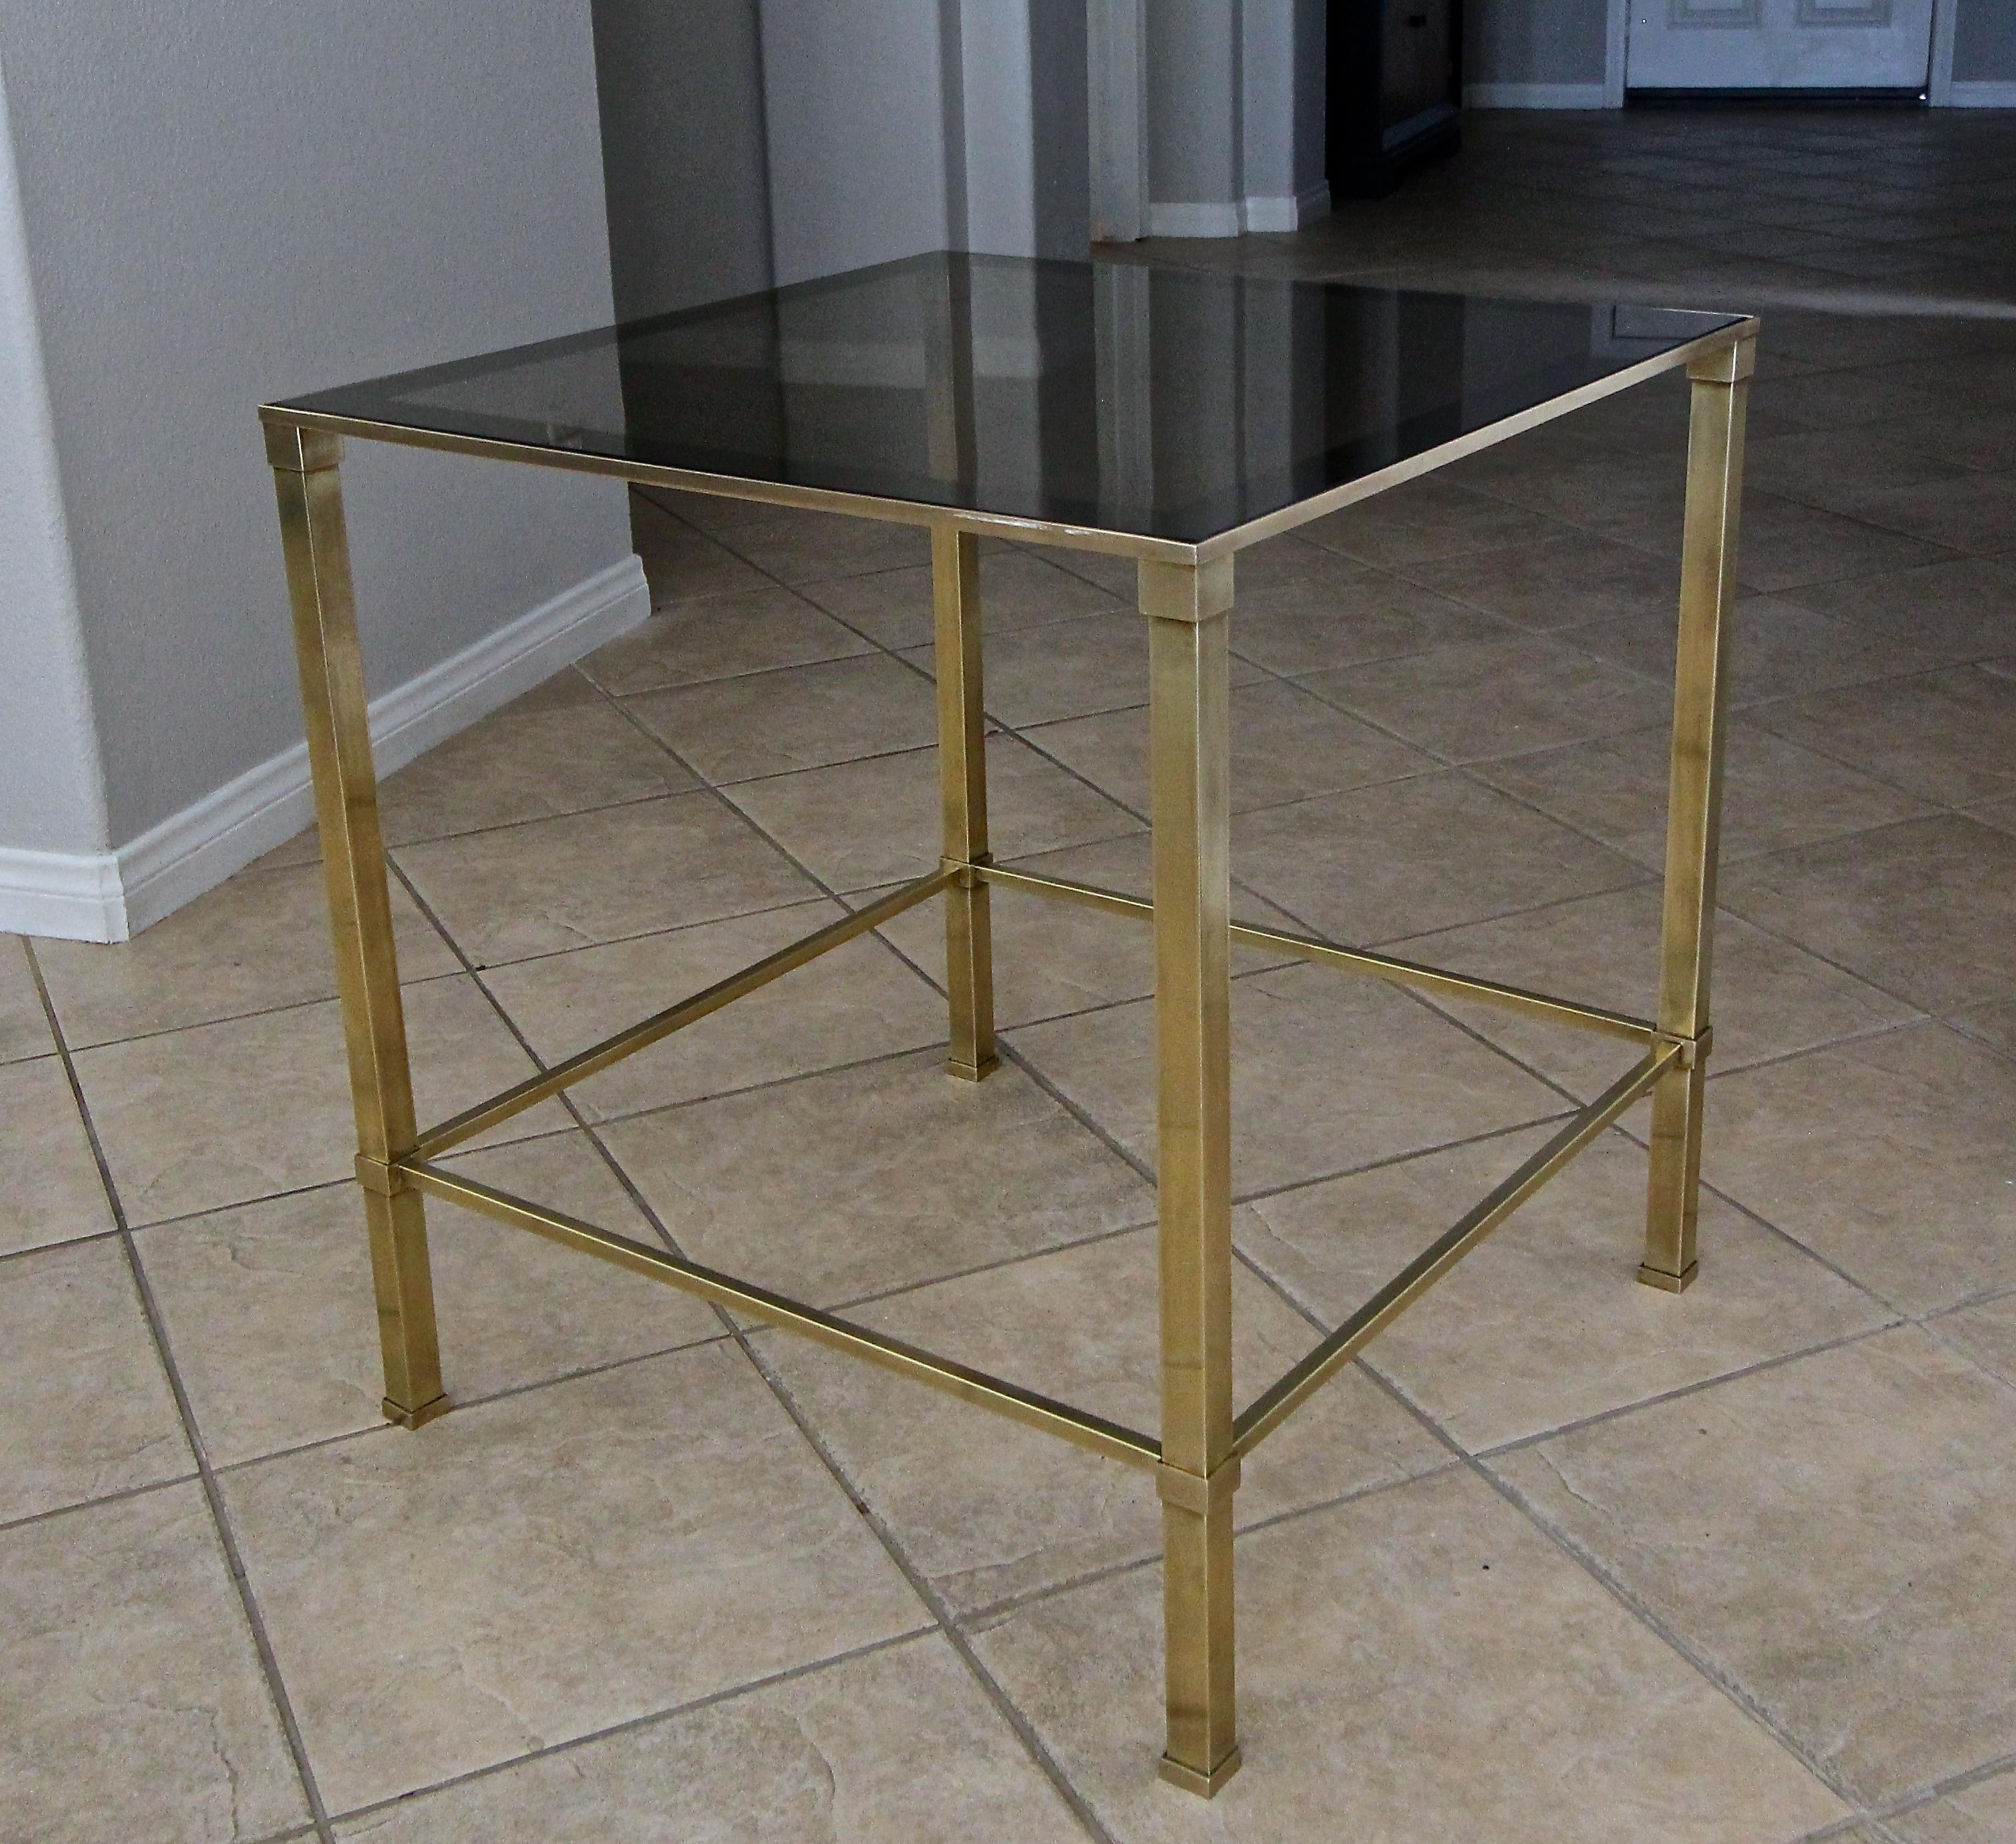 Large scale brass 2-tier square side or occasional end table, with tinted glass mirrored edge insert top. Nice overall aged patina to brass. Quality constructed with solid brass framing. Attributed to Mastercraft.